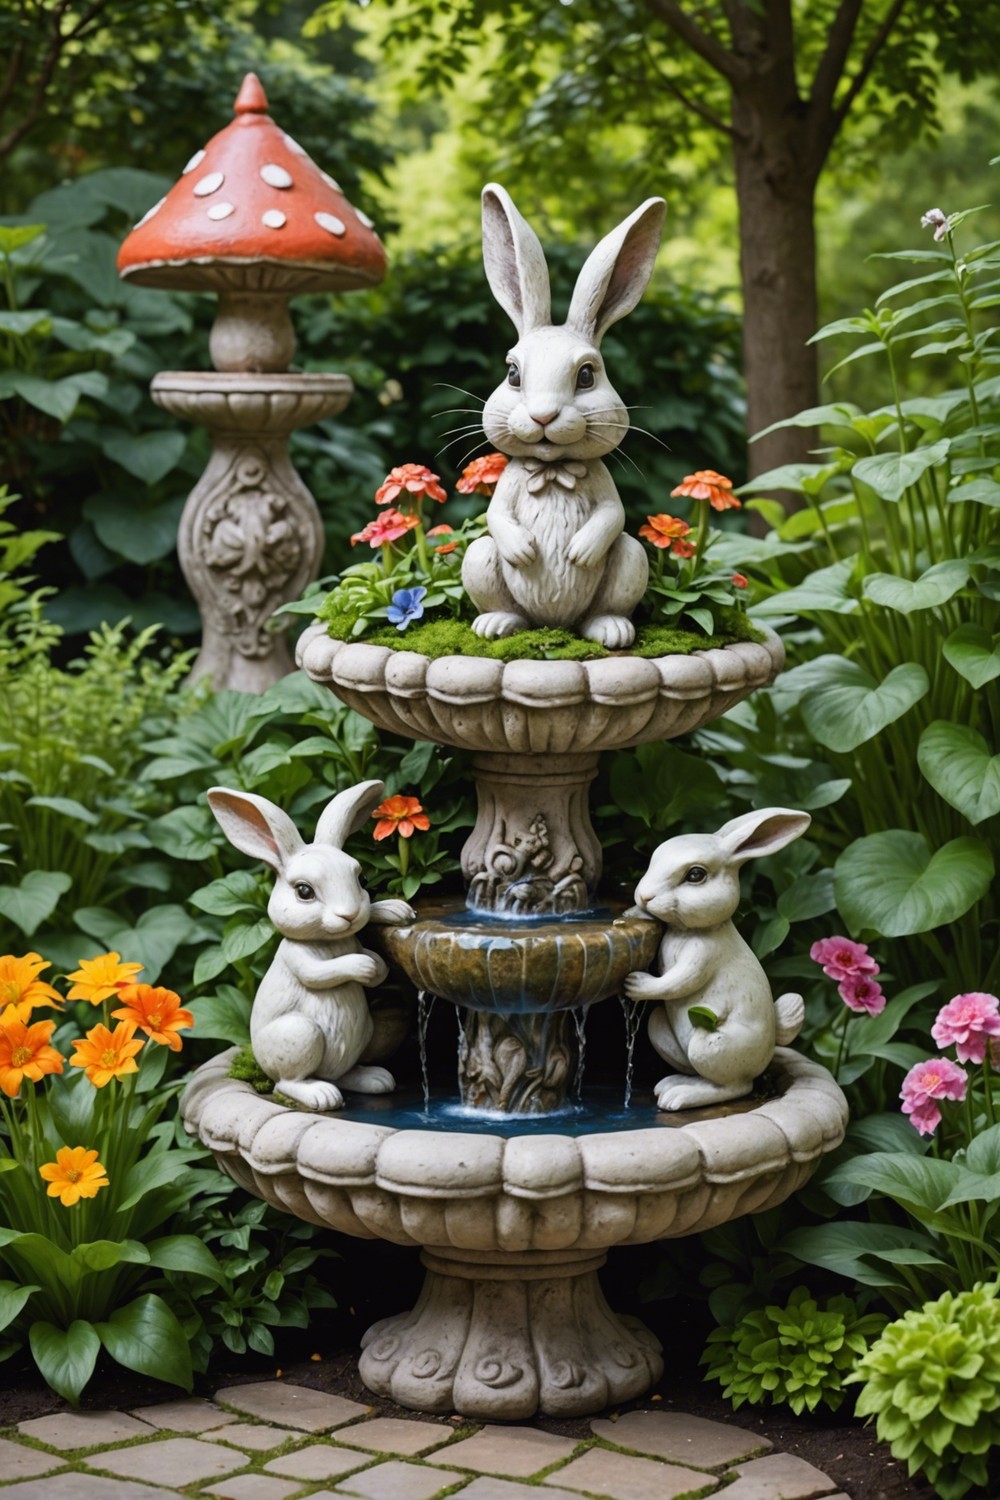 Whimsical Garden Statues and Ornaments